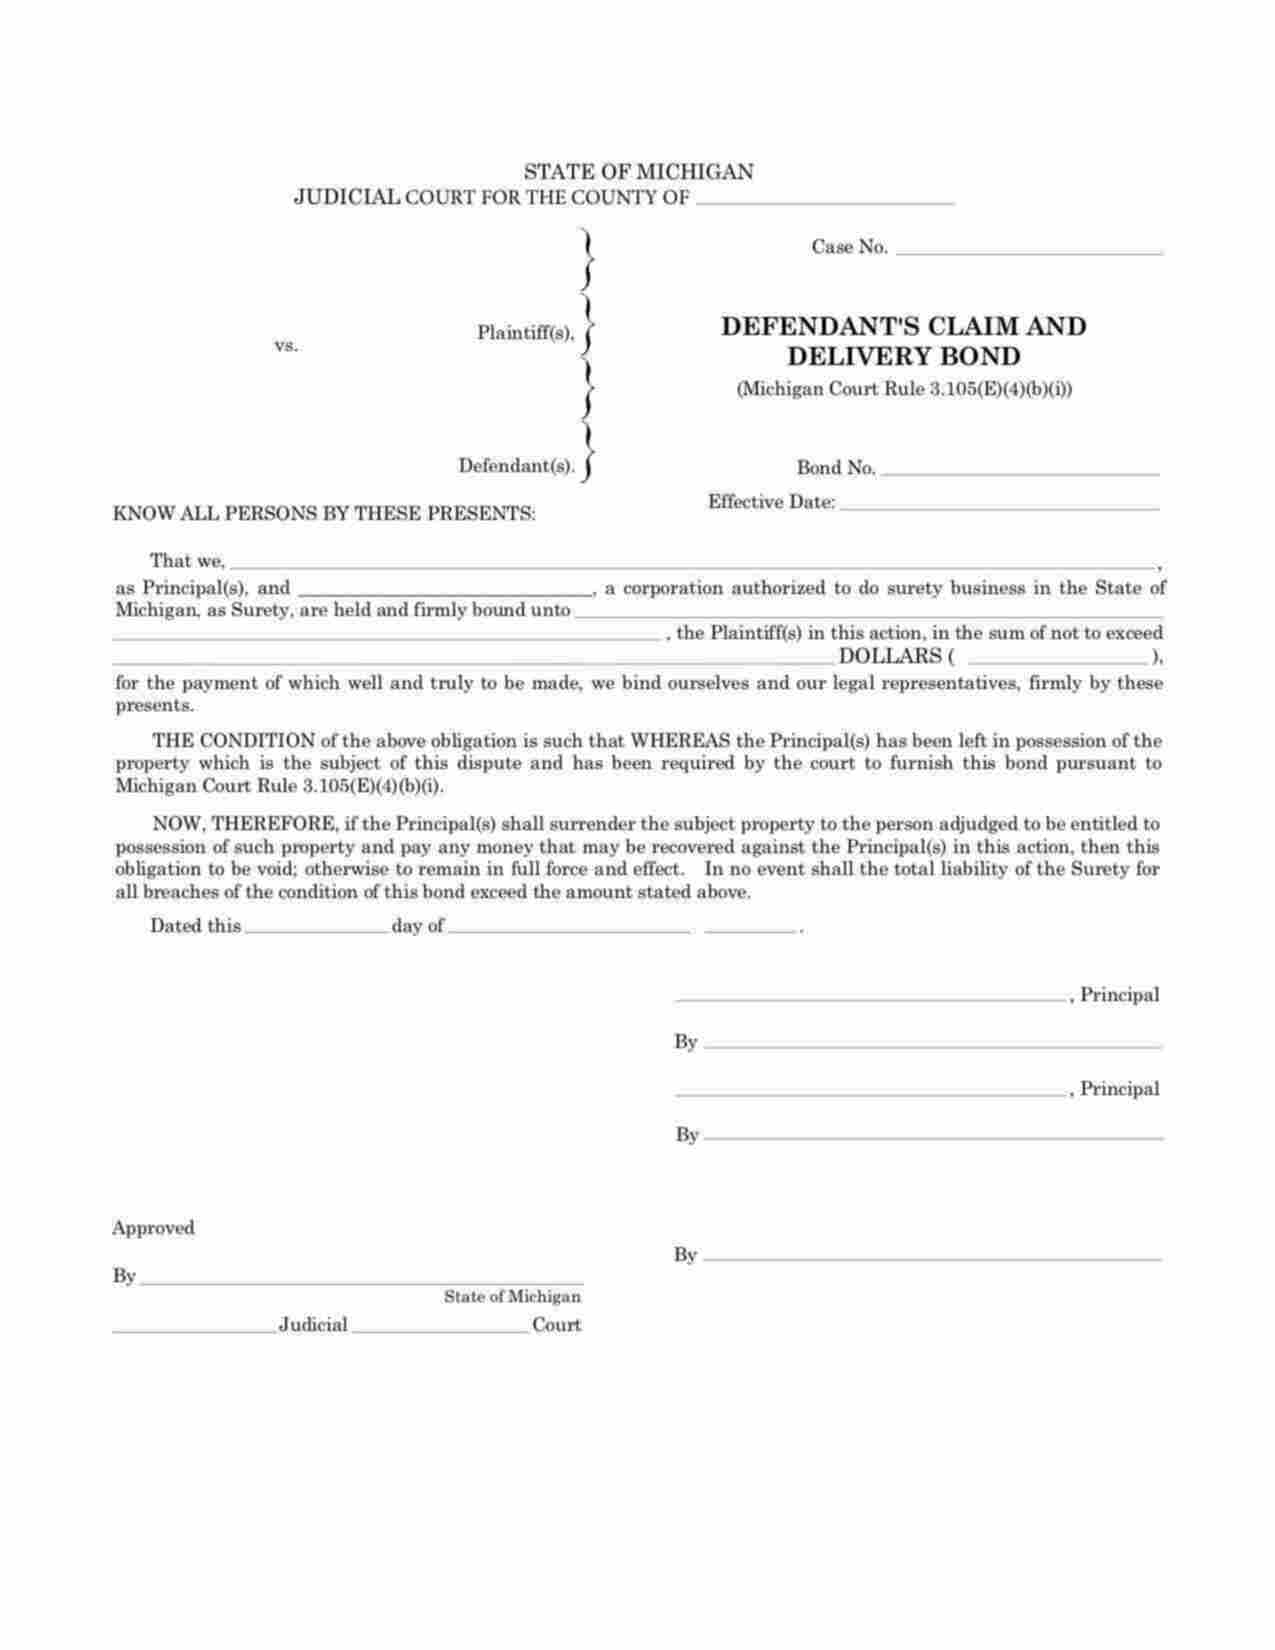 Michigan Defendants Claim and Delivery Bond Form